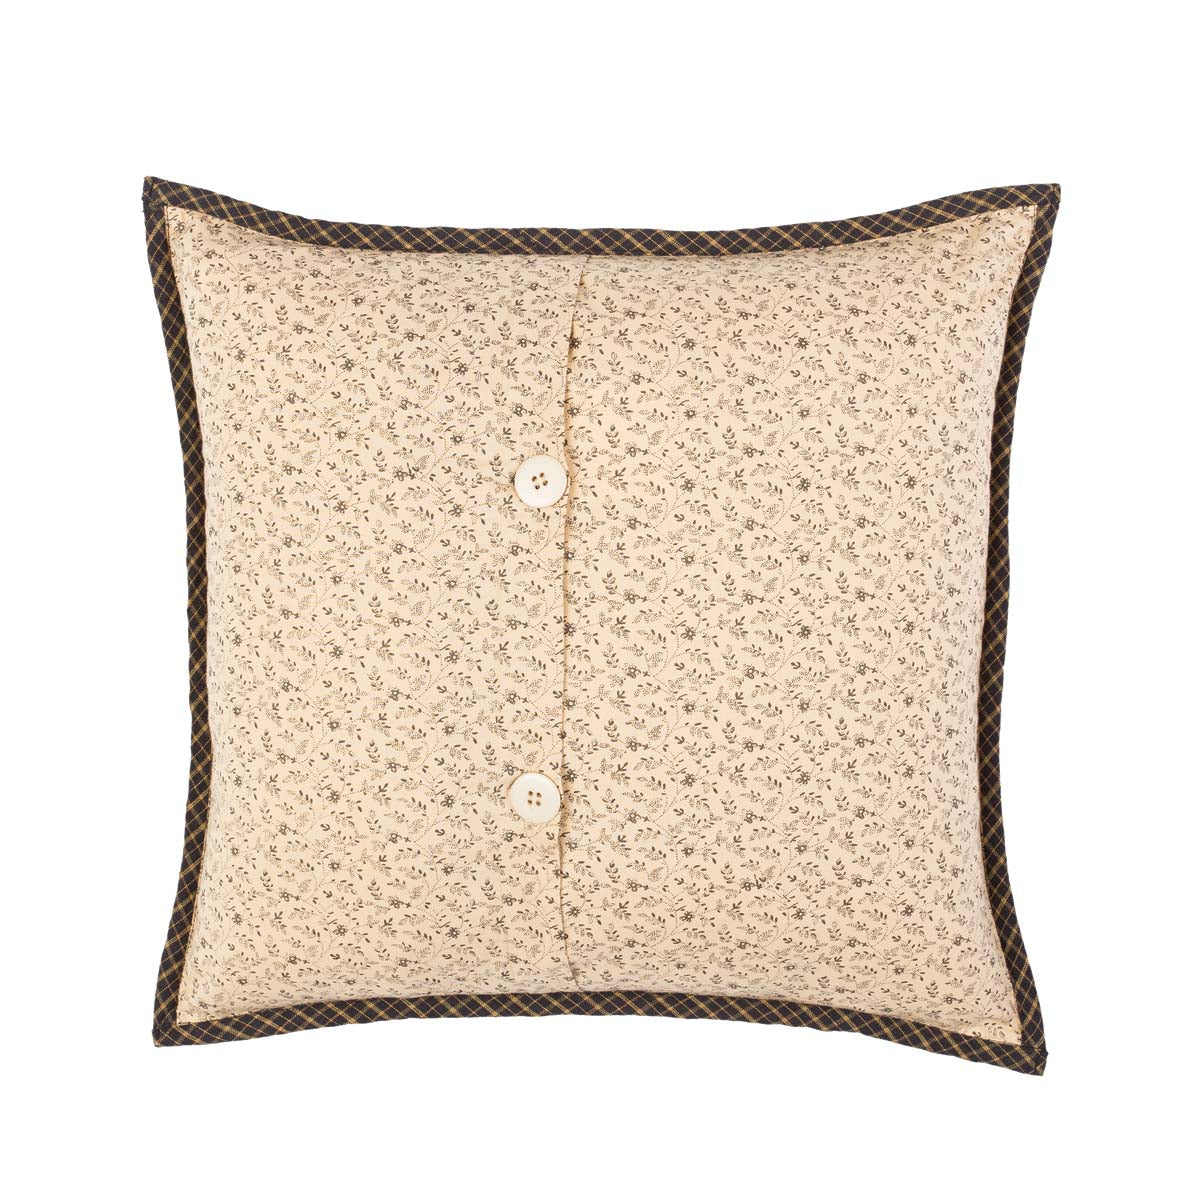 32685-Kettle-Grove-Quilted-Pillow-16x16-image-5